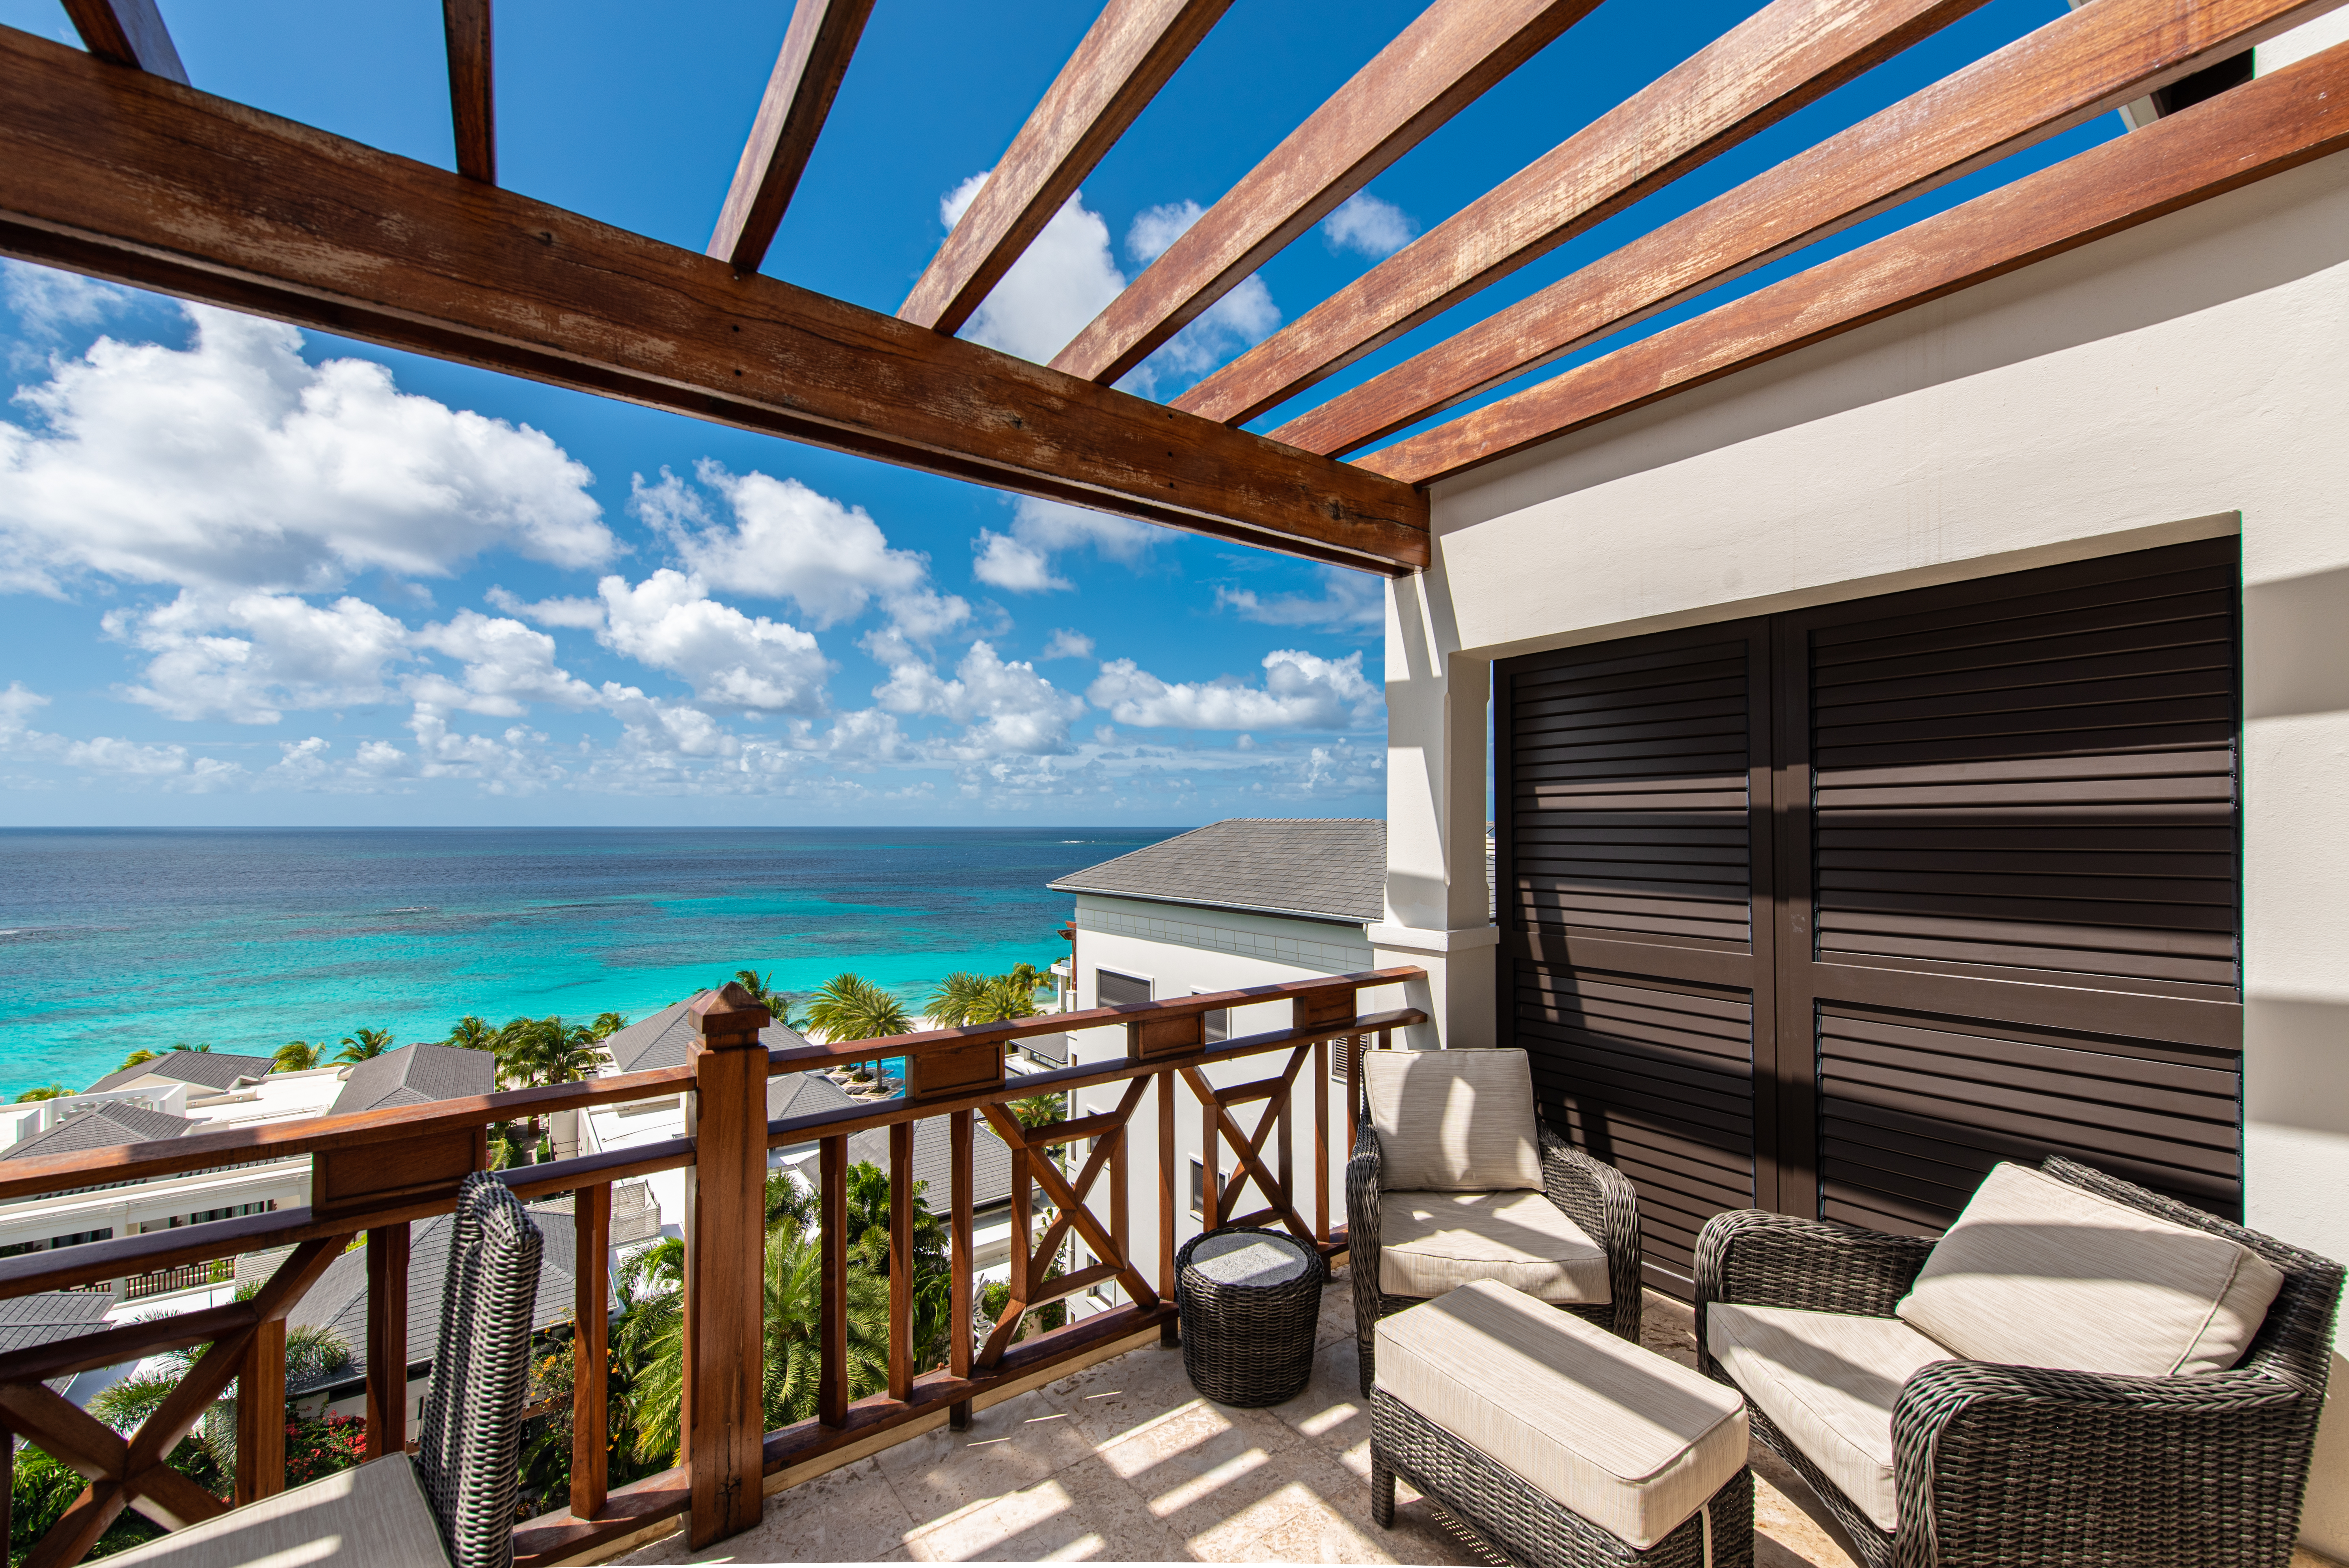 Outdoor balcony with lounge chairs and view of ocean